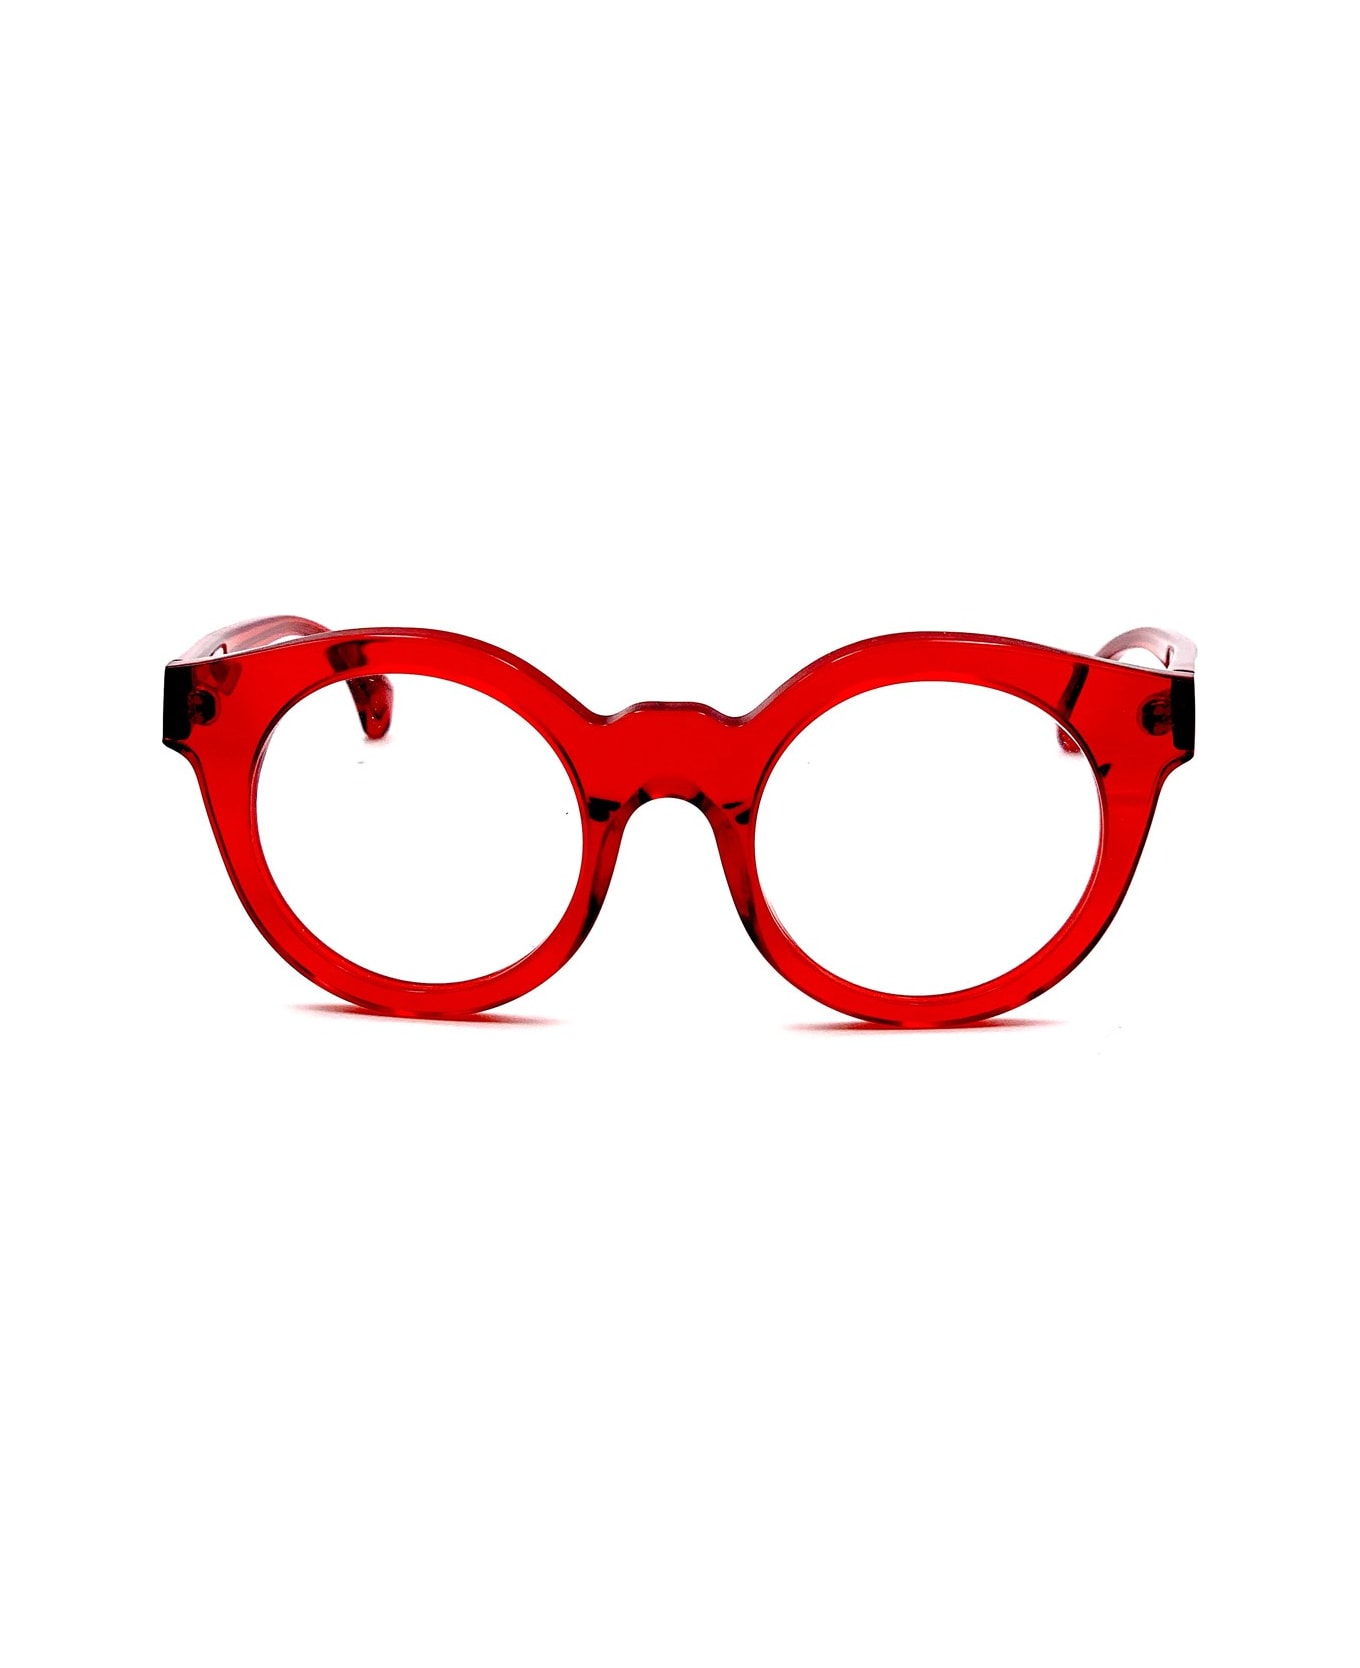 Jacques Durand Aix M-219 Glasses - Rosso アイウェア